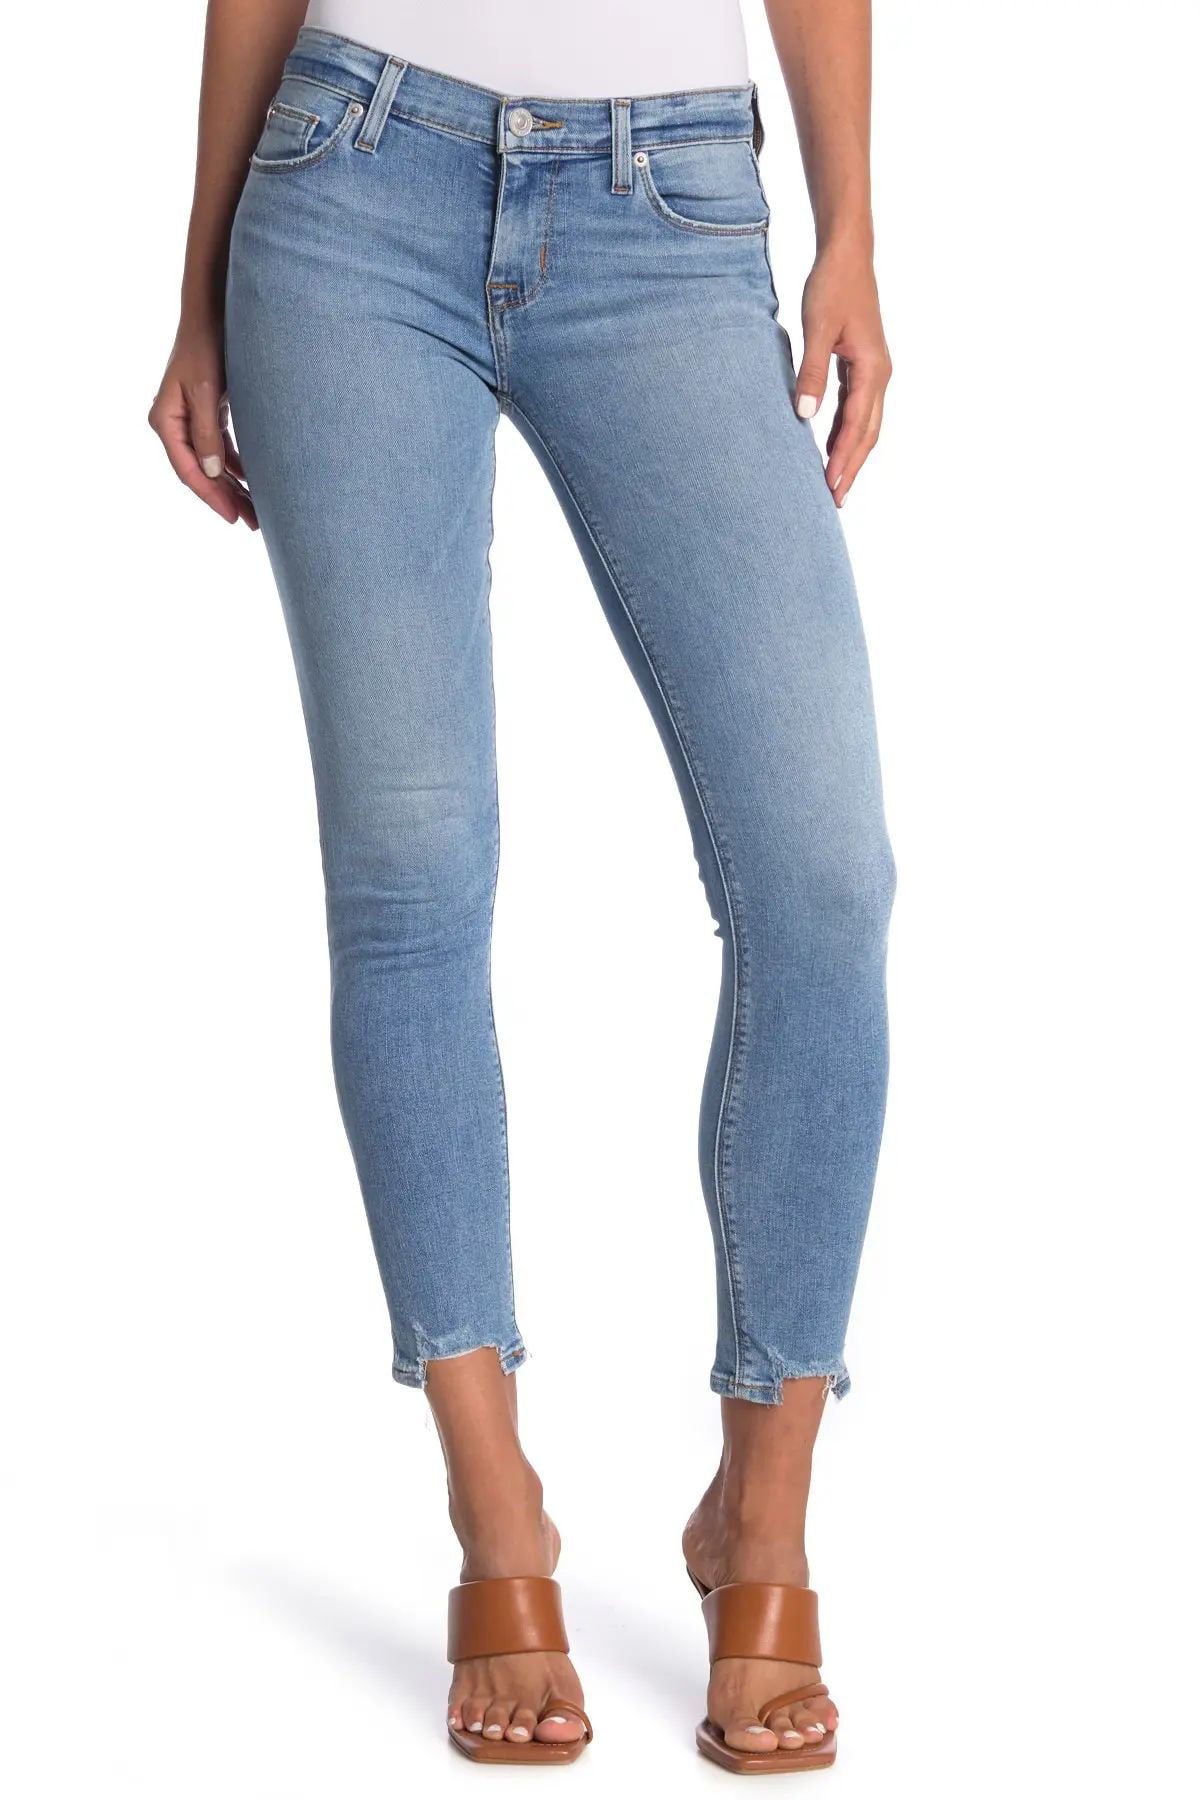 Hudson Womens Jeans Ankle Super Skinny Ripped Stretch Blue 26 